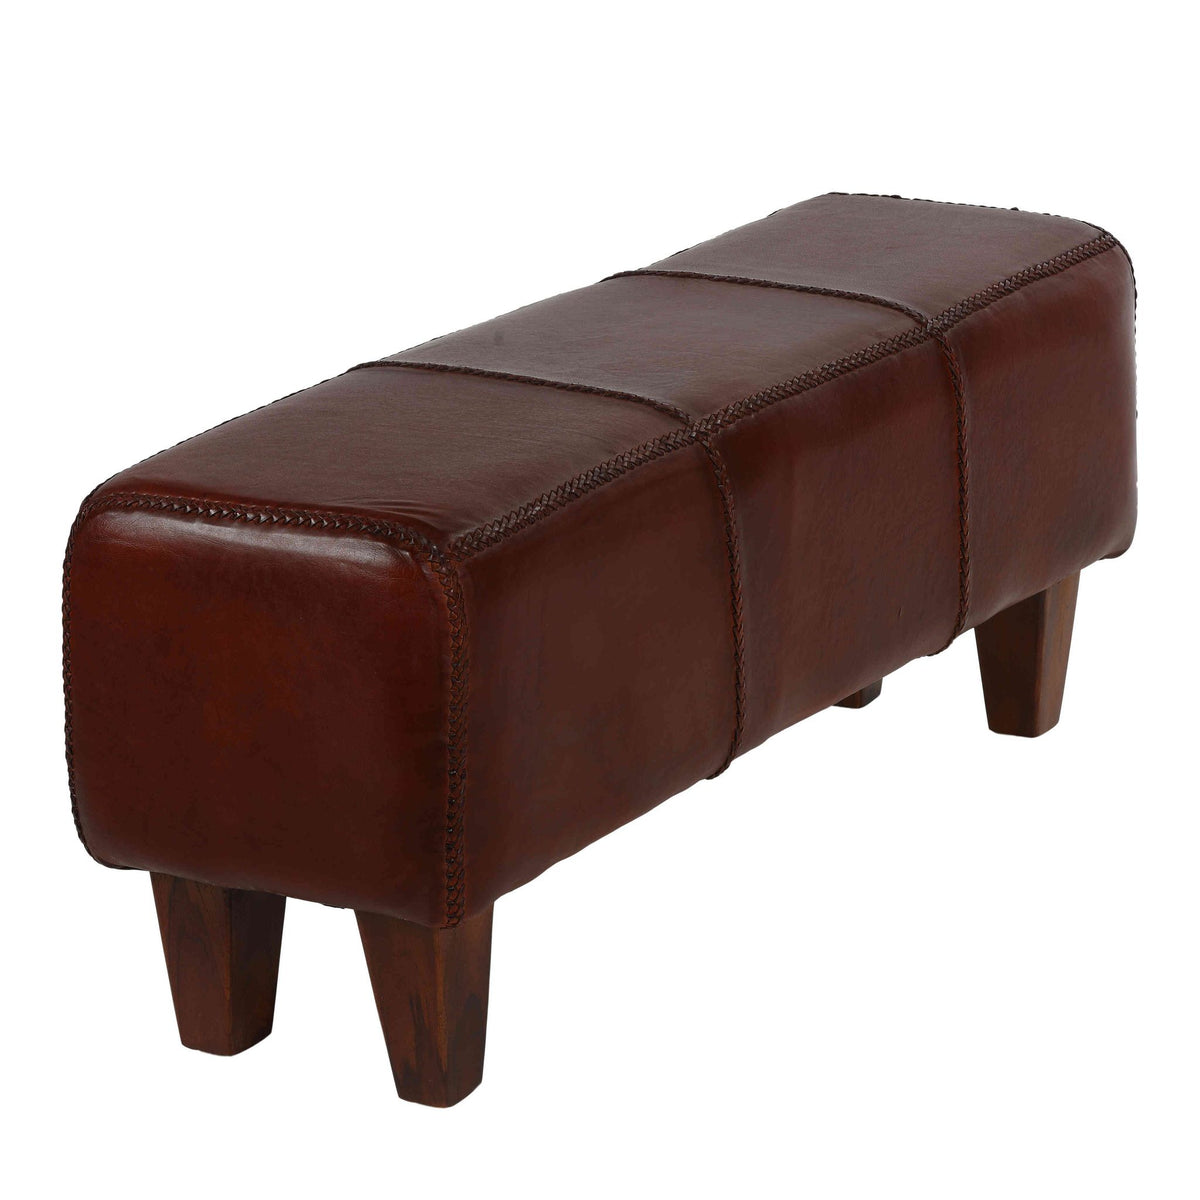 Bare Decor Morgan Large Bench Genuine 100% Leather, Brown